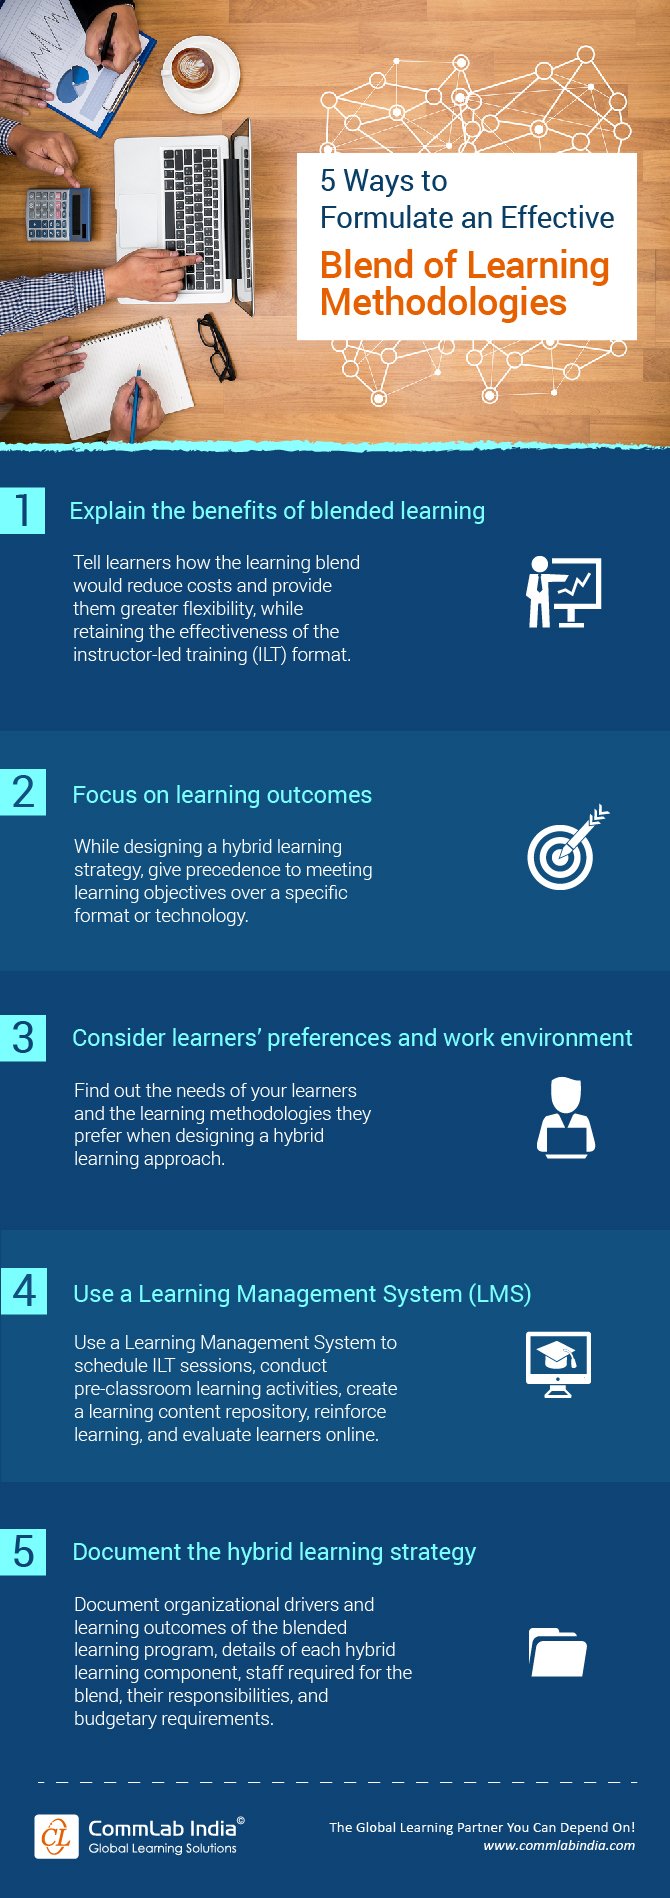 5 Ways to Formulate an Effective Blend of Learning Methodologies [Infographic]